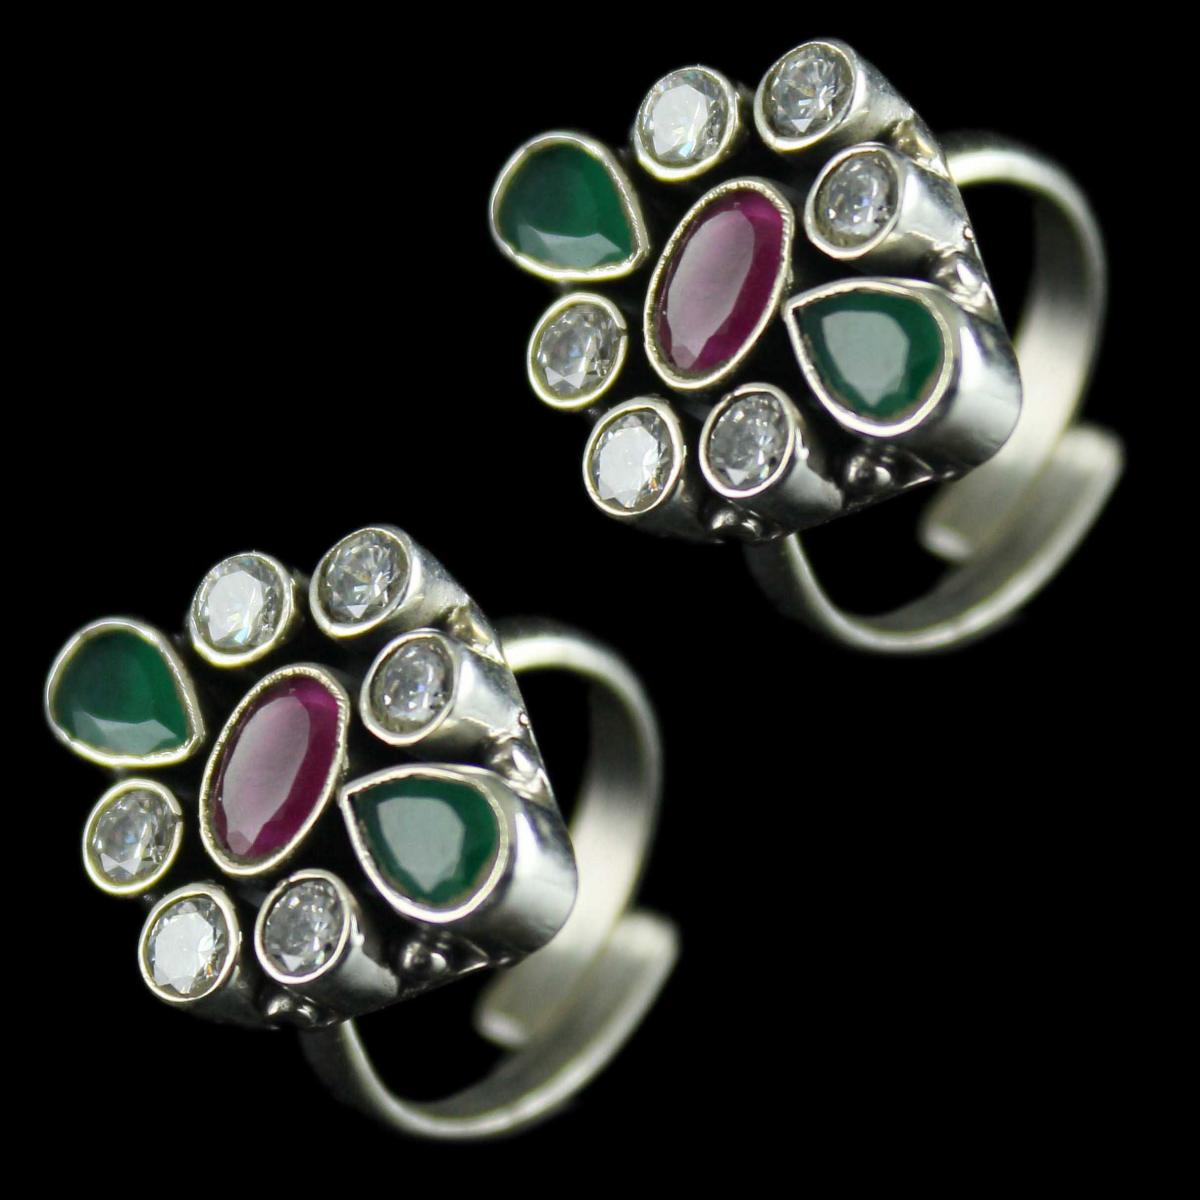 92.5 Sterling Silver Toe Rings Studded Multi Stones